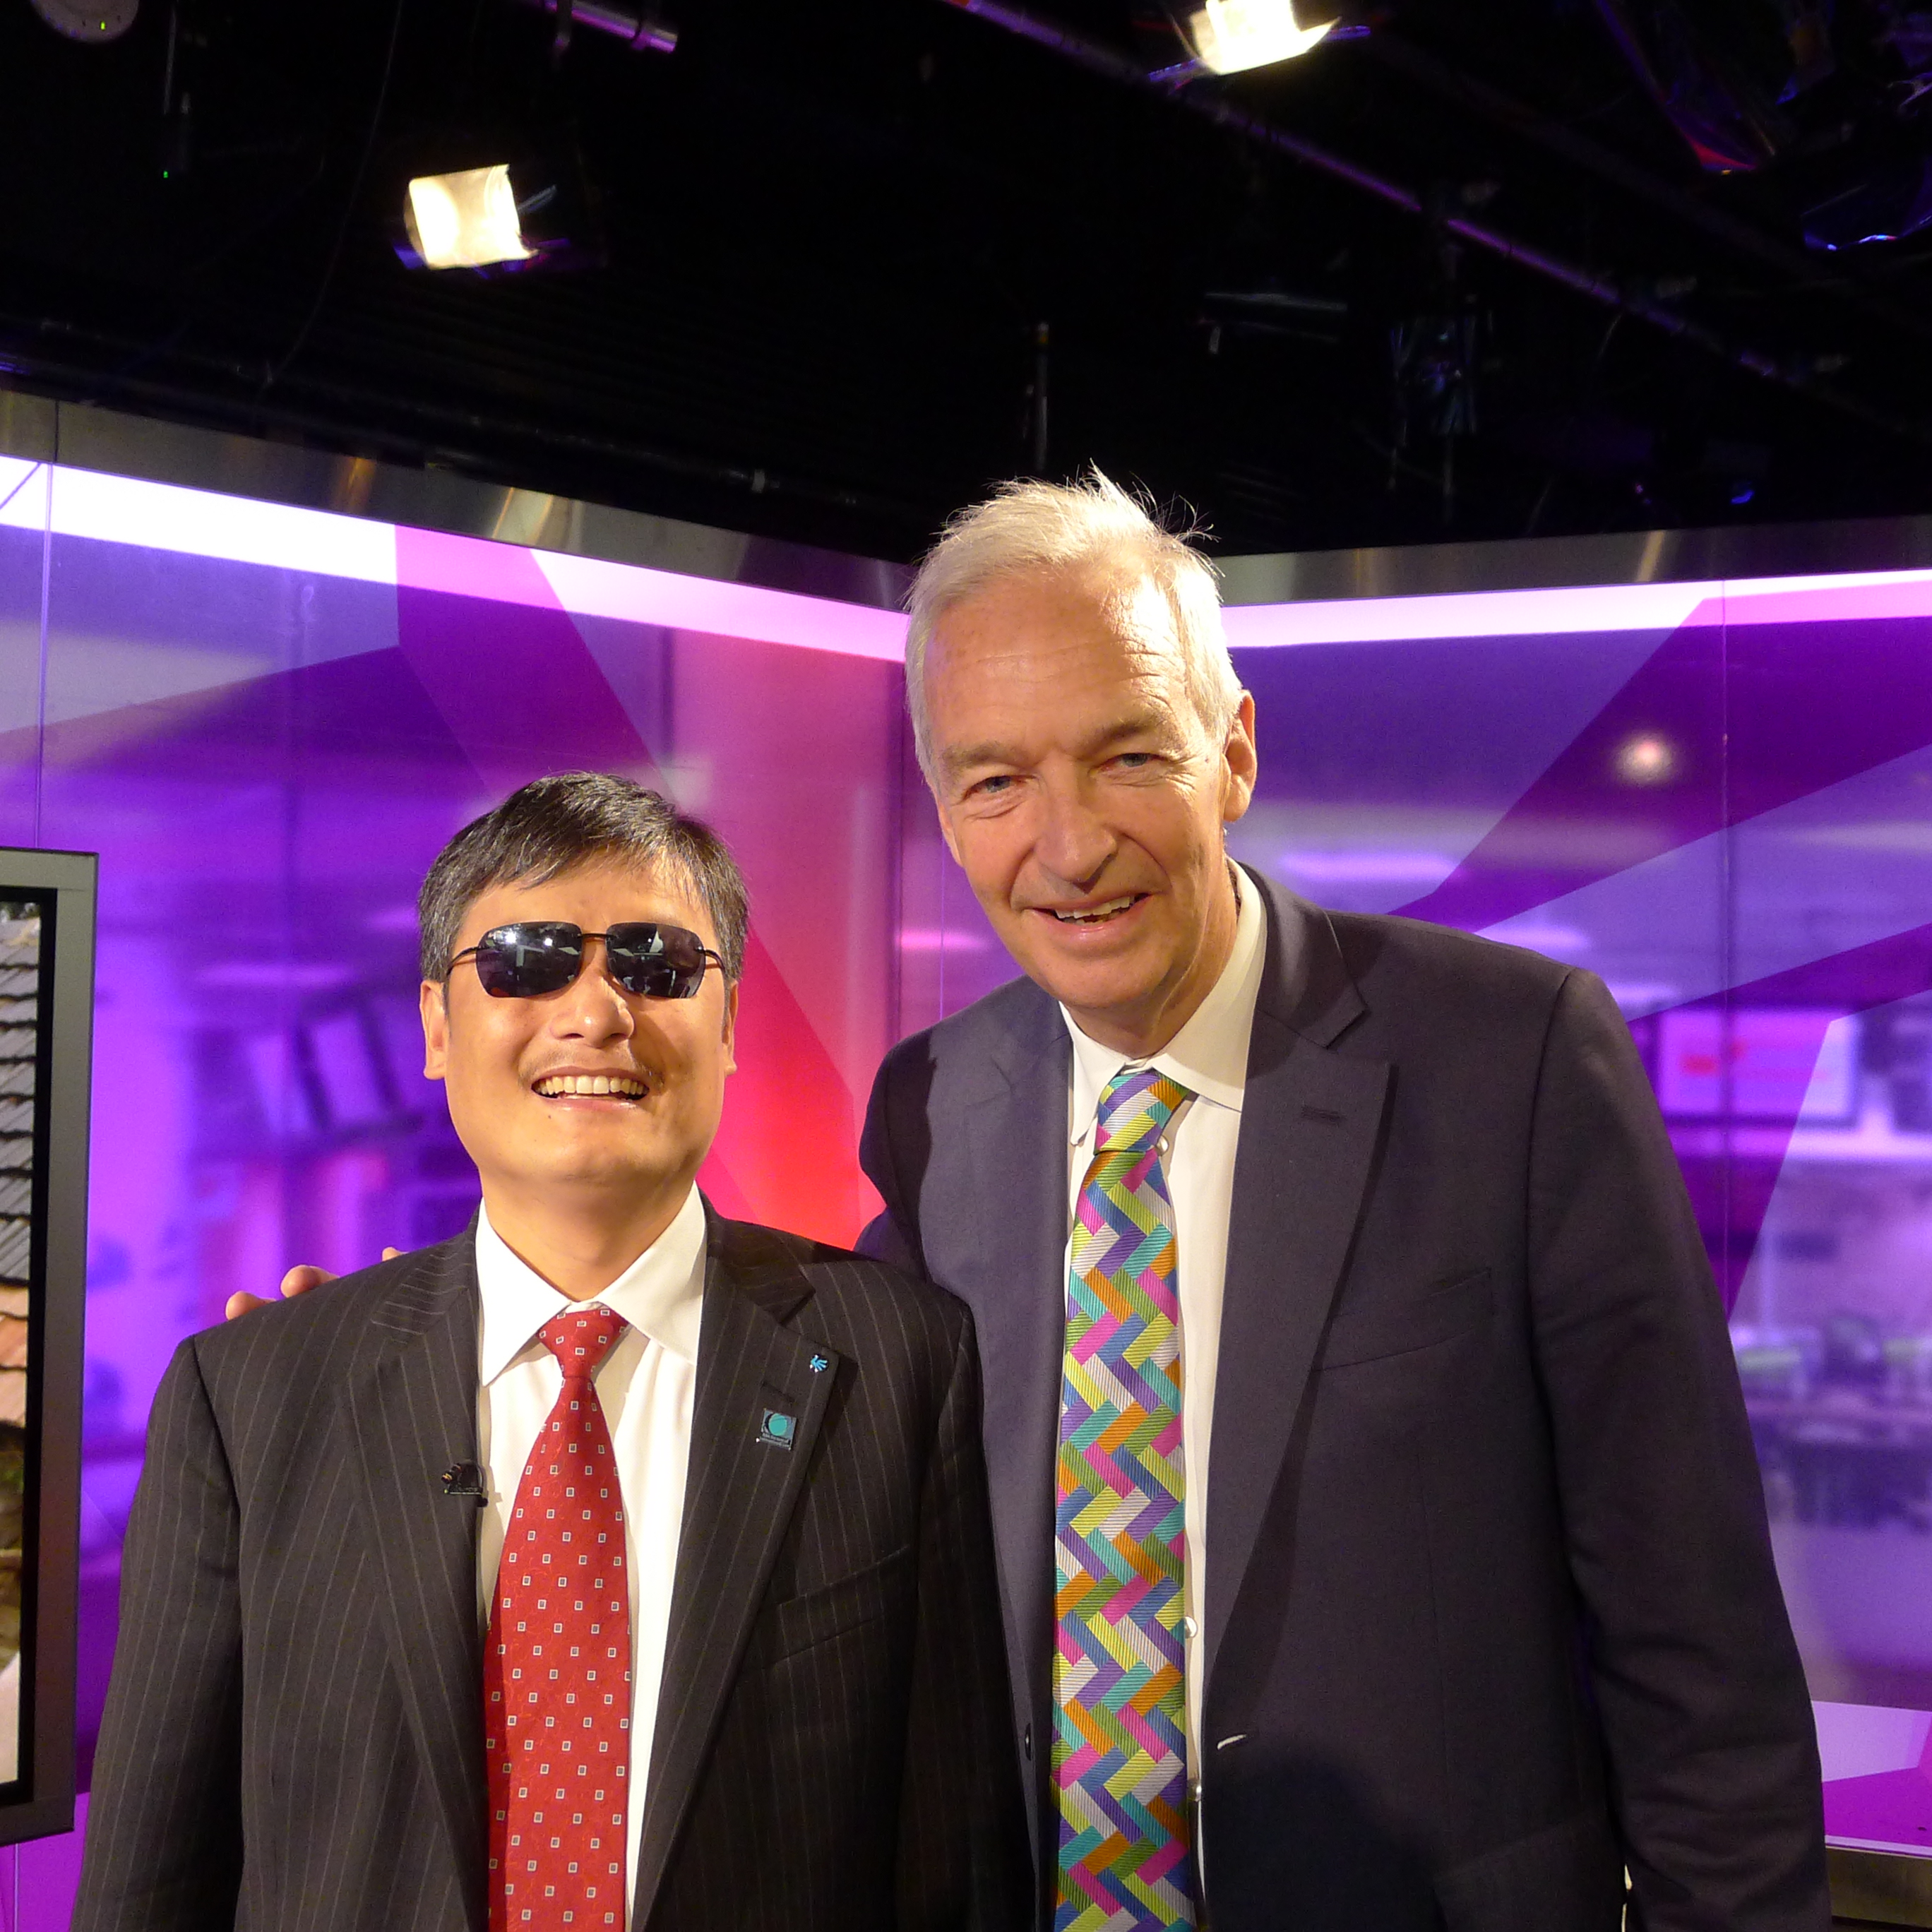 Chen was interviewed on national TV and radio - pictured here with Jon Snow of Channel Four news.